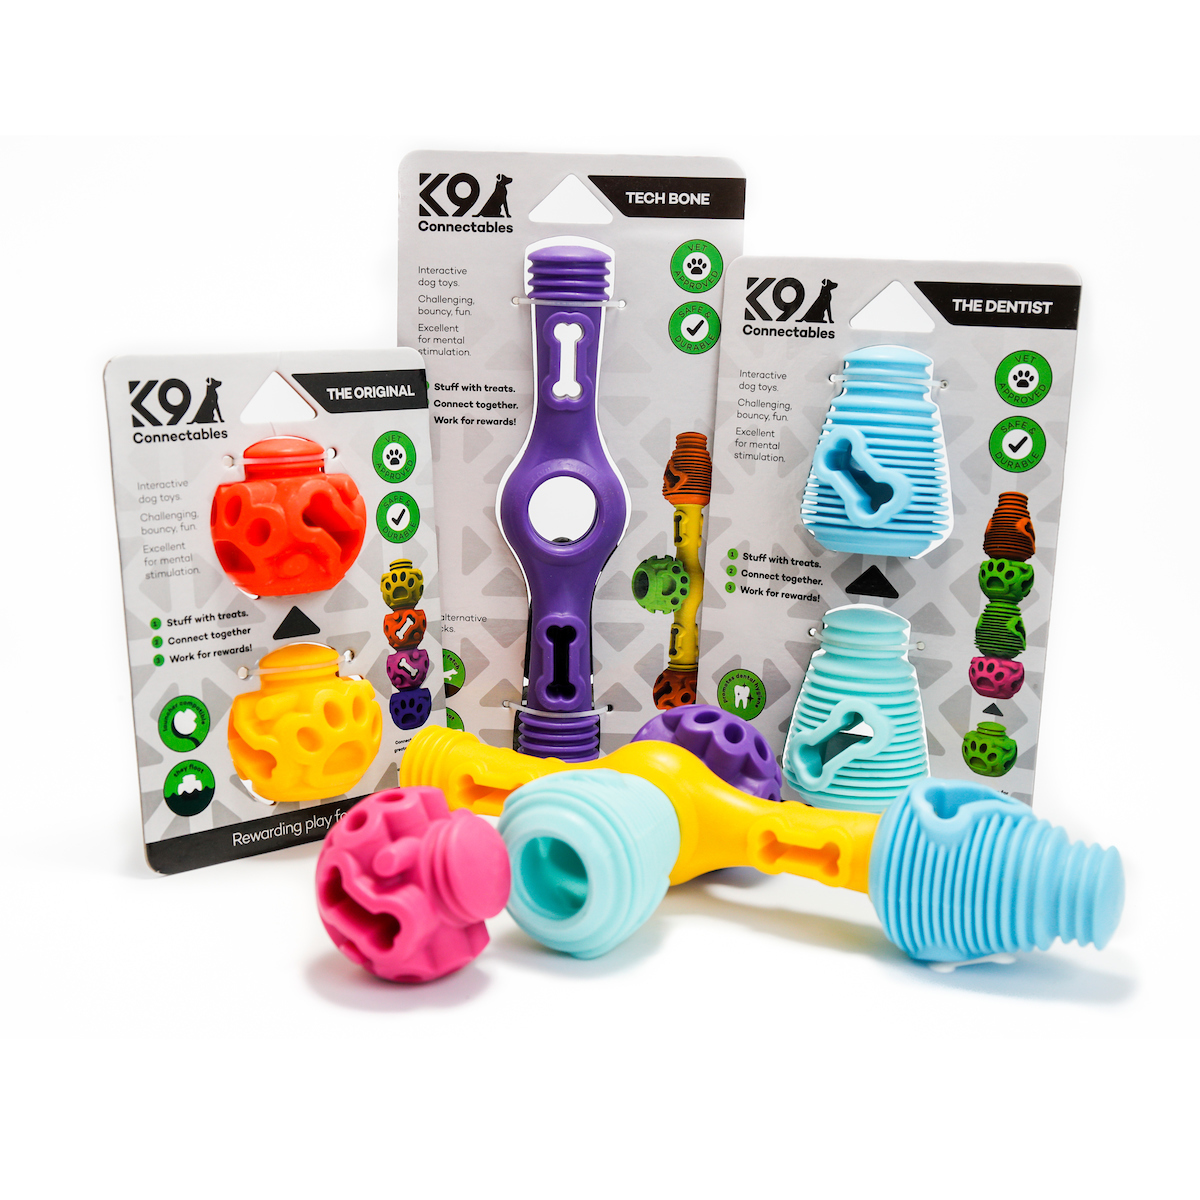 K9 Connectables Dog Toy Review, Enrichment Dog Toys